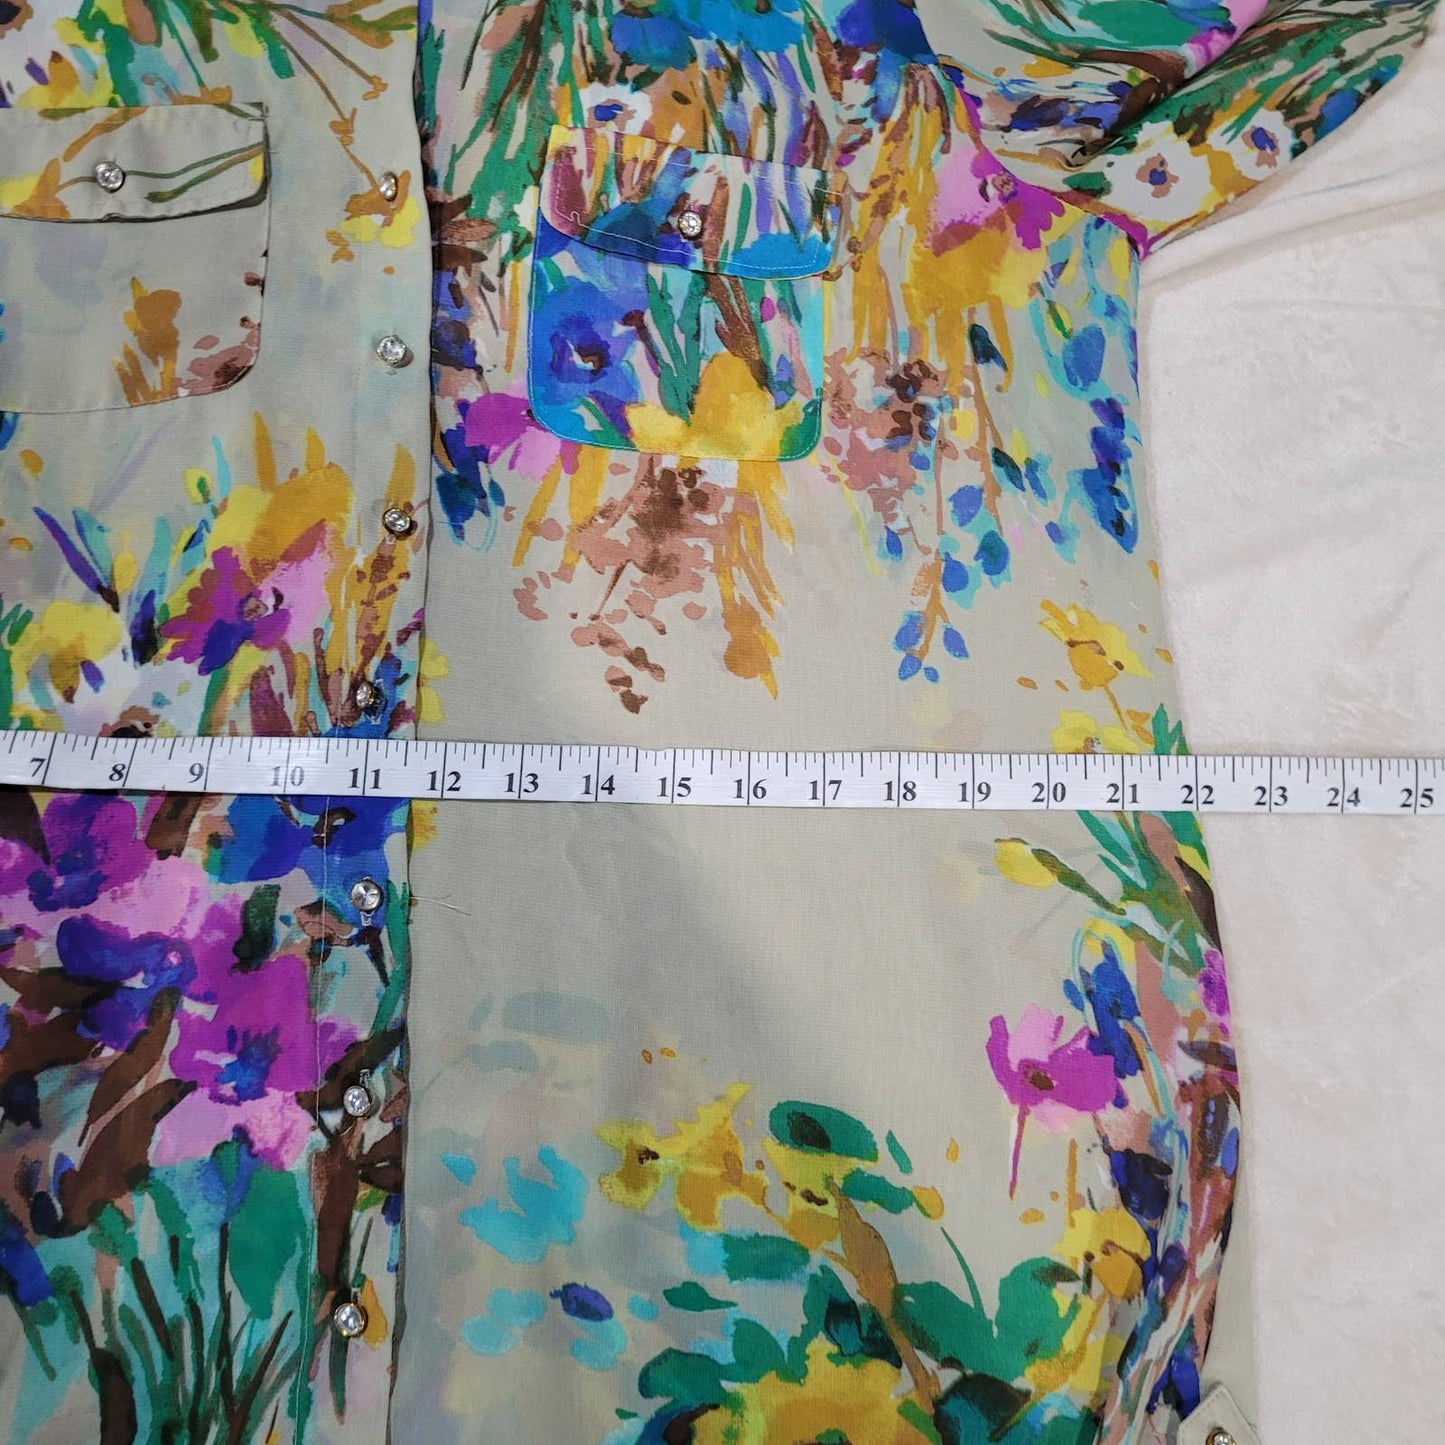 Sunny Leigh Floral Chiffon Blouse with Rhinestone Buttons - Size Large